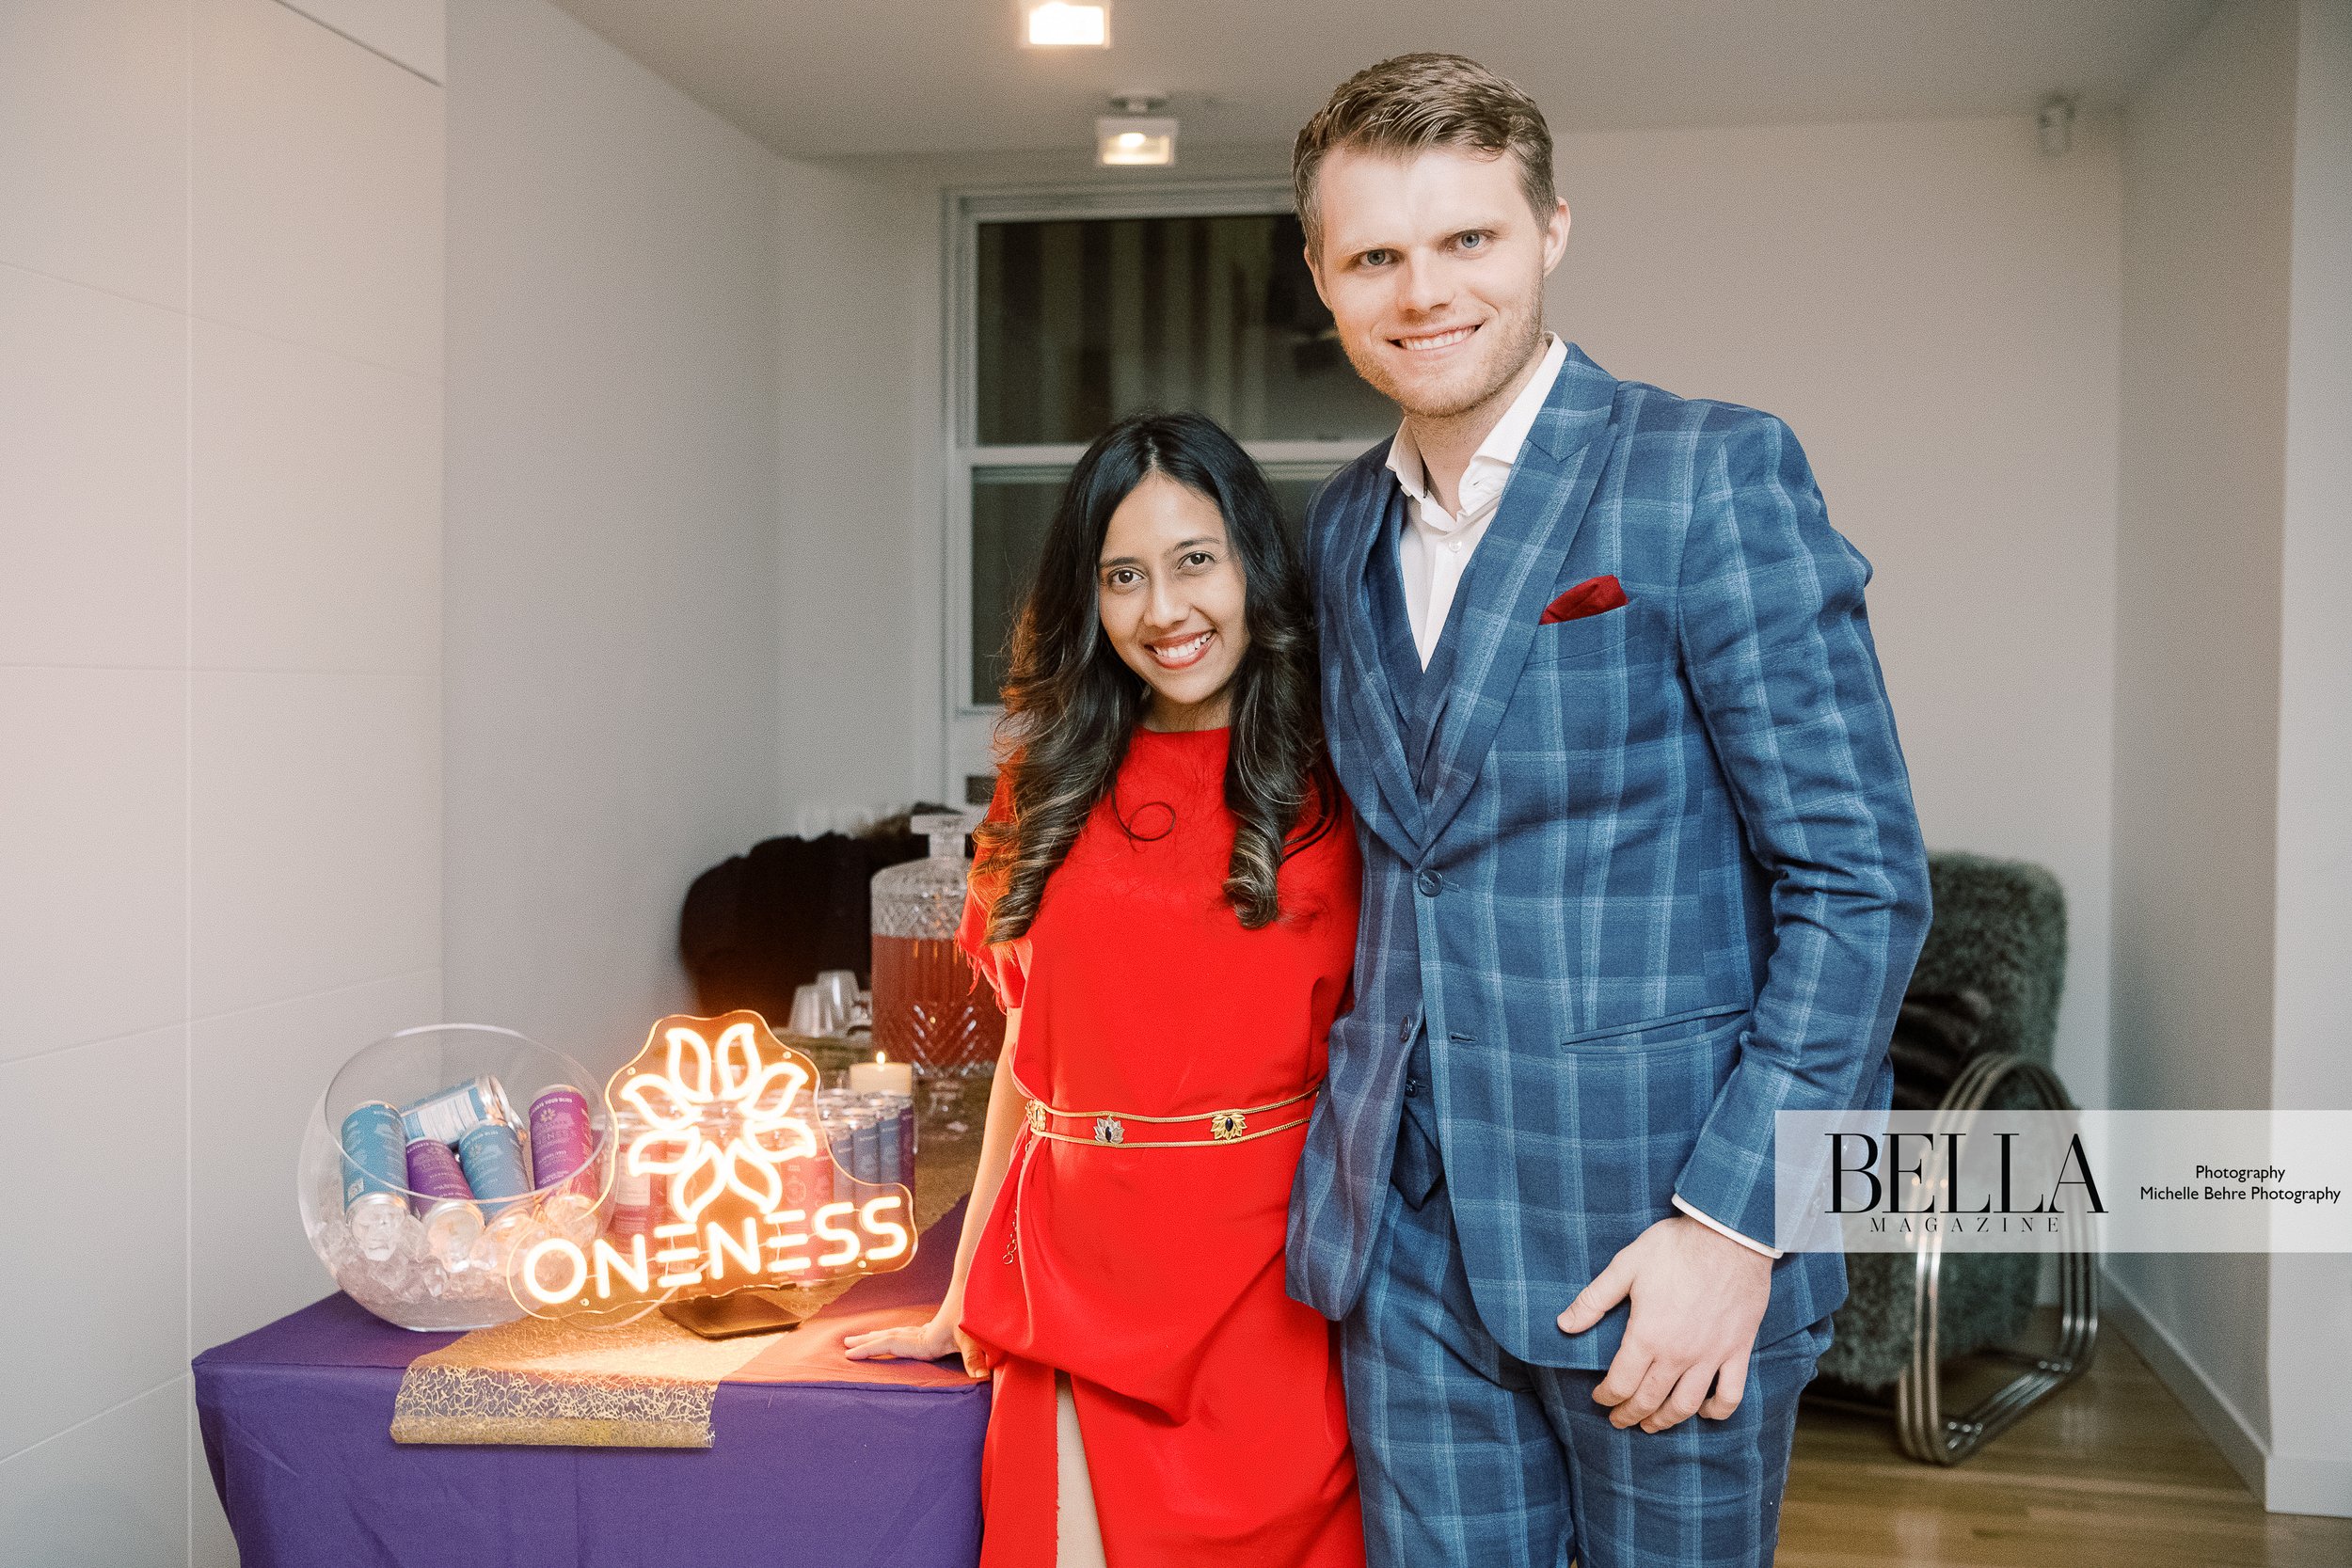 Michelle-Behre-Photography-Watermarked-2024-BELLA-MAGAZINE-BELLA-AT-Relationship-Issue-Cover-Party-Helen-Yarmak-68.jpg